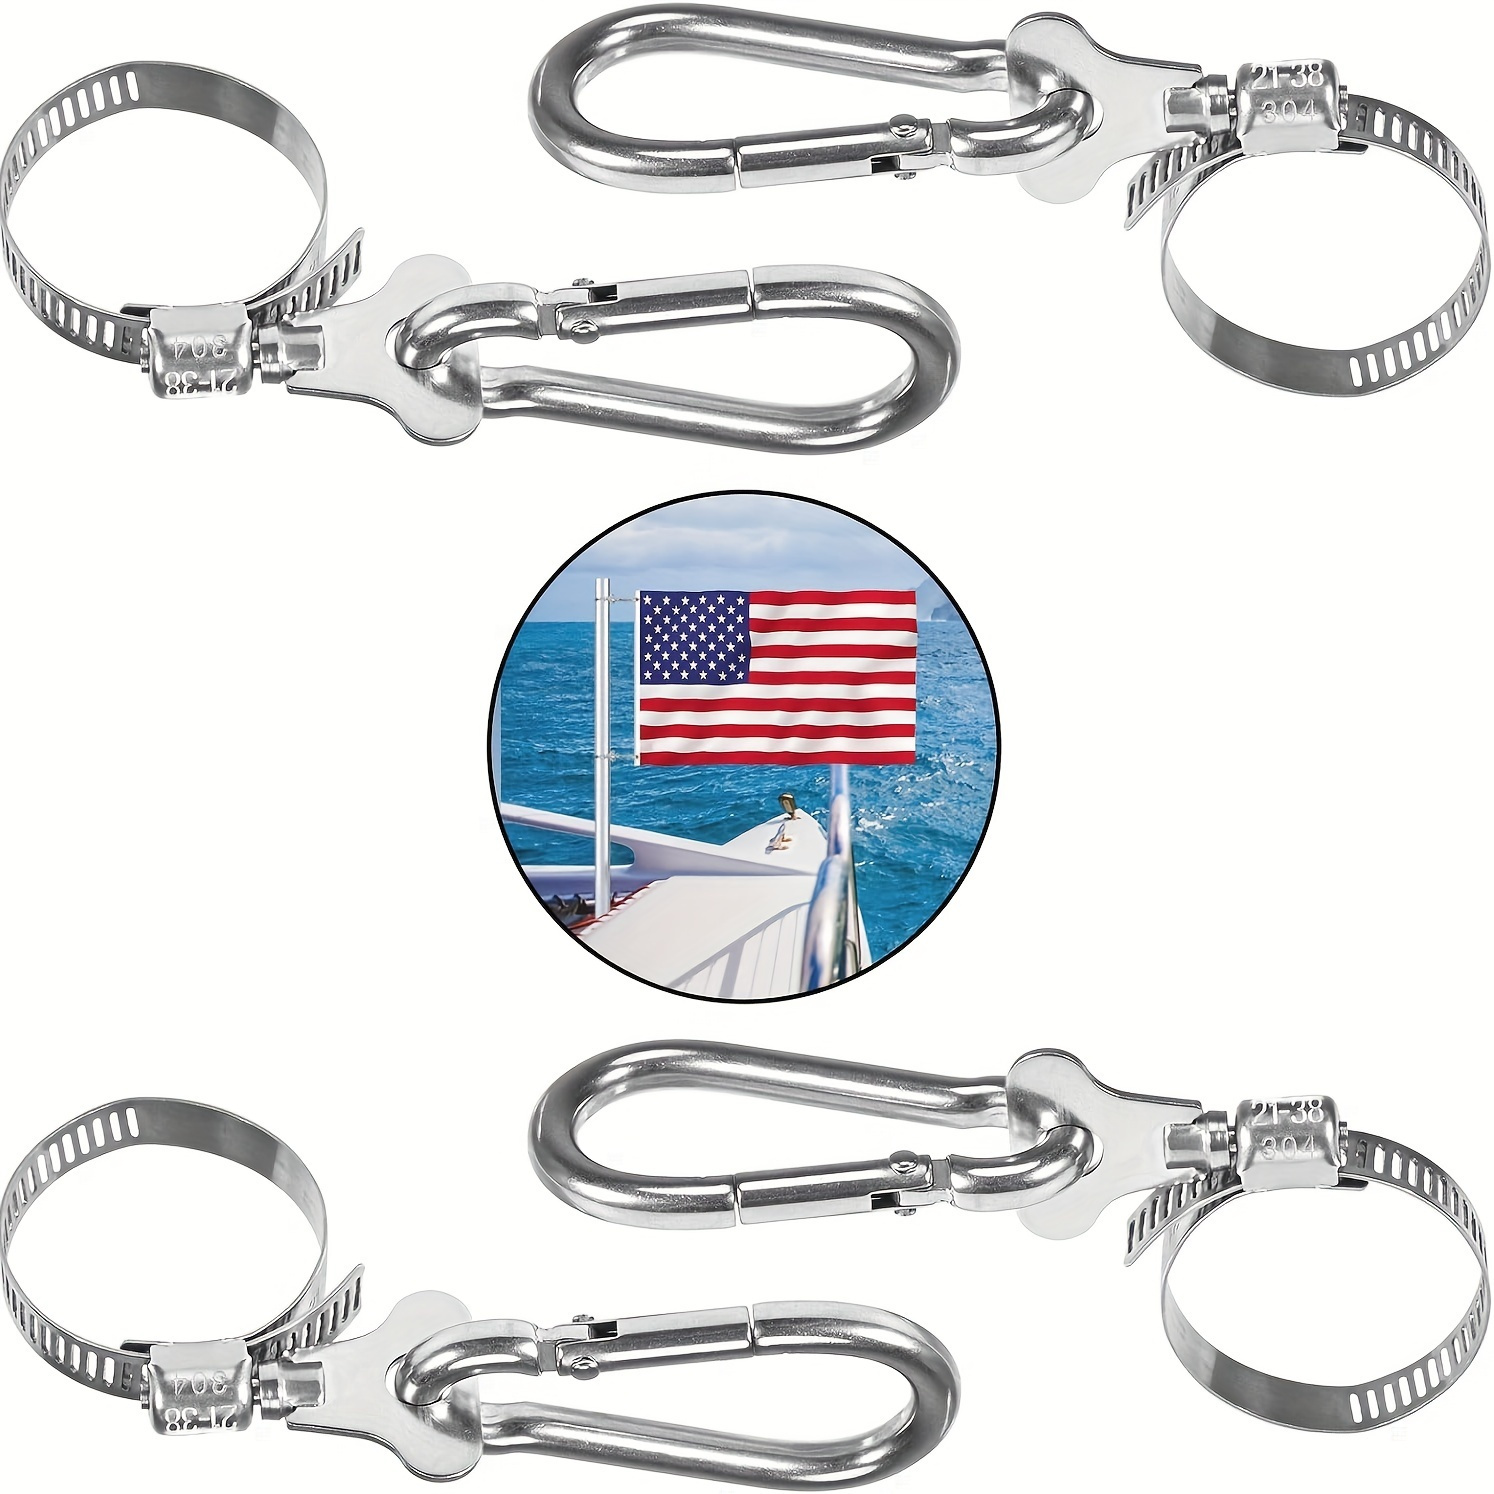 

4-piece Stainless Steel Flagpole Clips With Carabiner - Durable, Adjustable Grommet For On Poles 0.75-1.25" Diameter